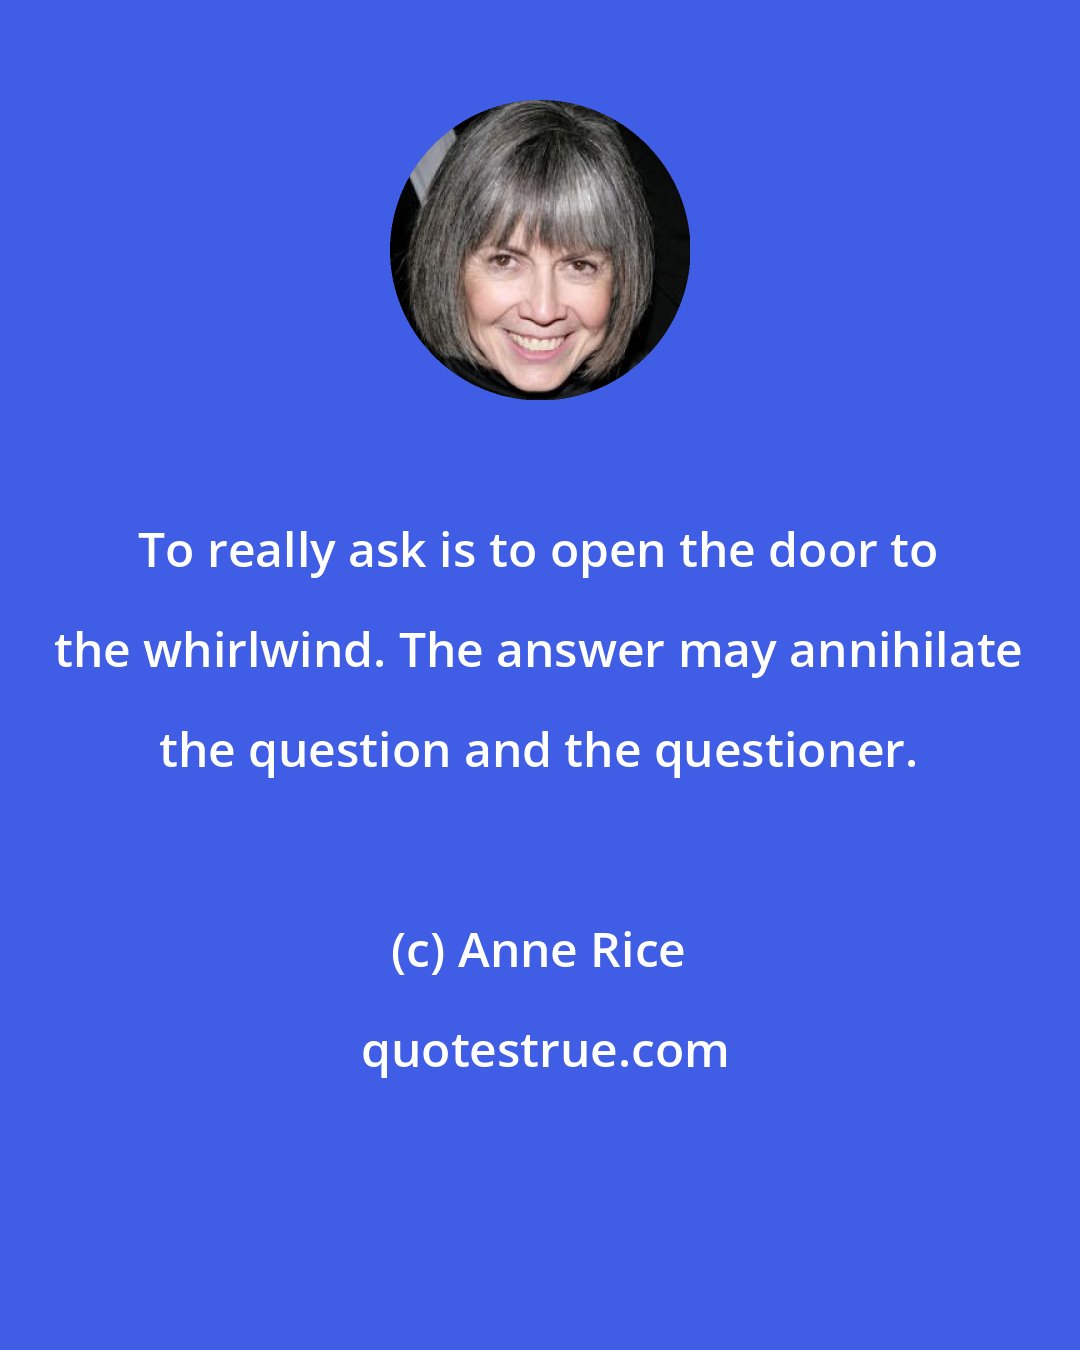 Anne Rice: To really ask is to open the door to the whirlwind. The answer may annihilate the question and the questioner.